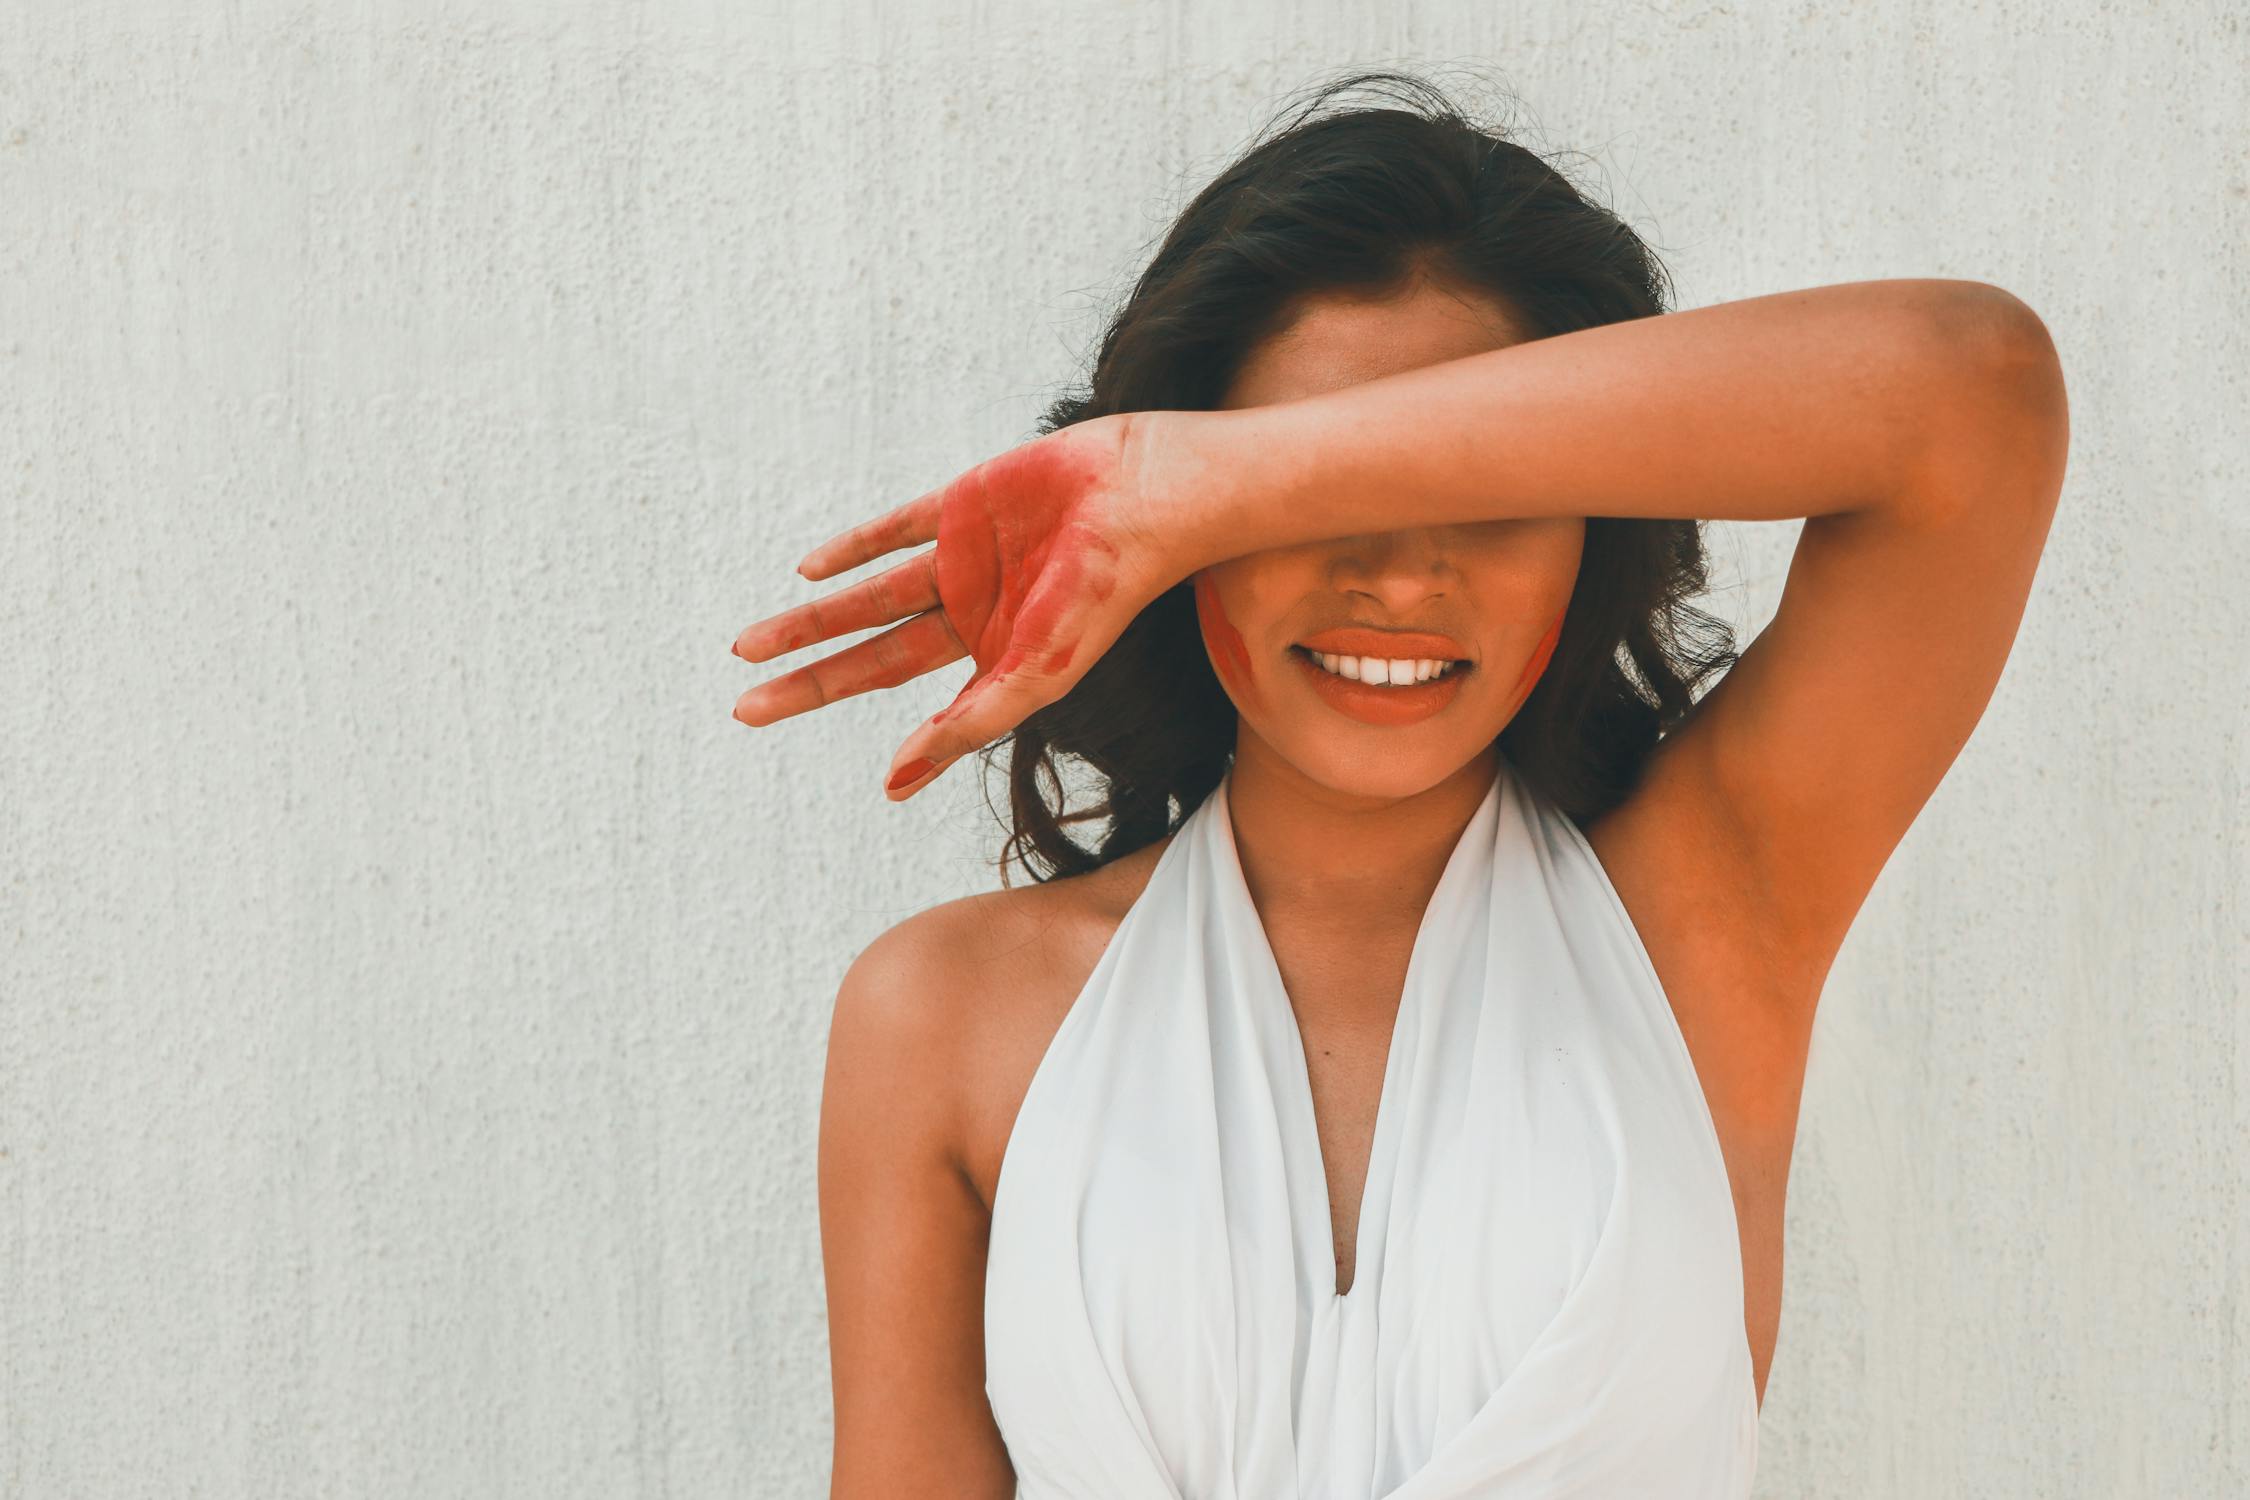 Self Esteem Photo by Sakshi Patwa from Pexels: https://www.pexels.com/photo/woman-in-white-halter-top-covering-eyes-with-arm-7295414/